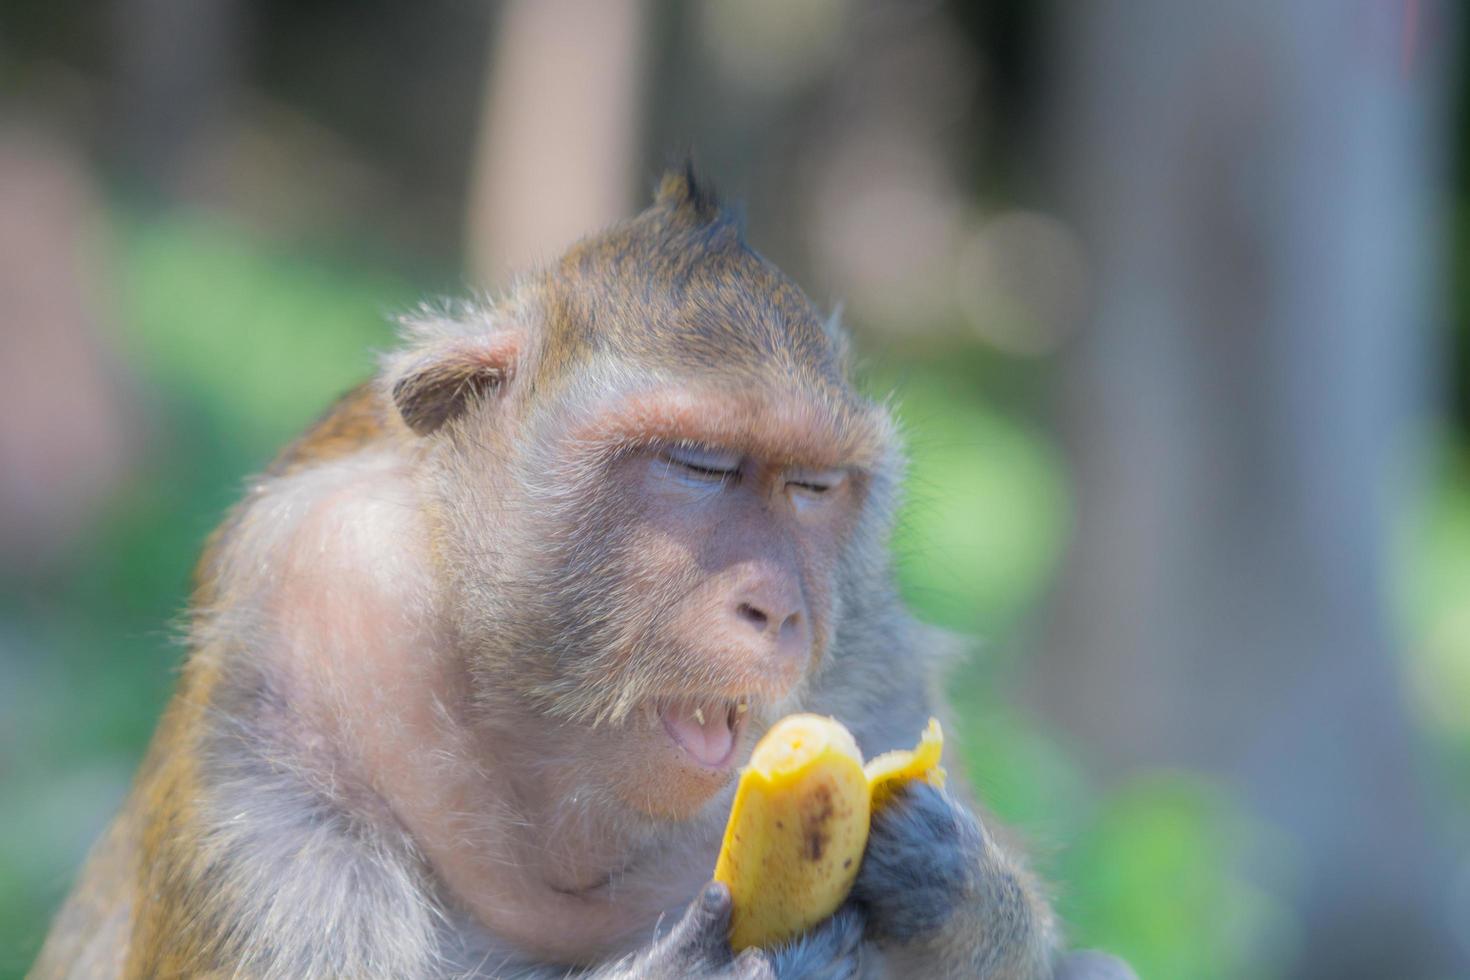 The monkey opens his mouth while eating a banana while his eyes are closed. Cute animal. photo